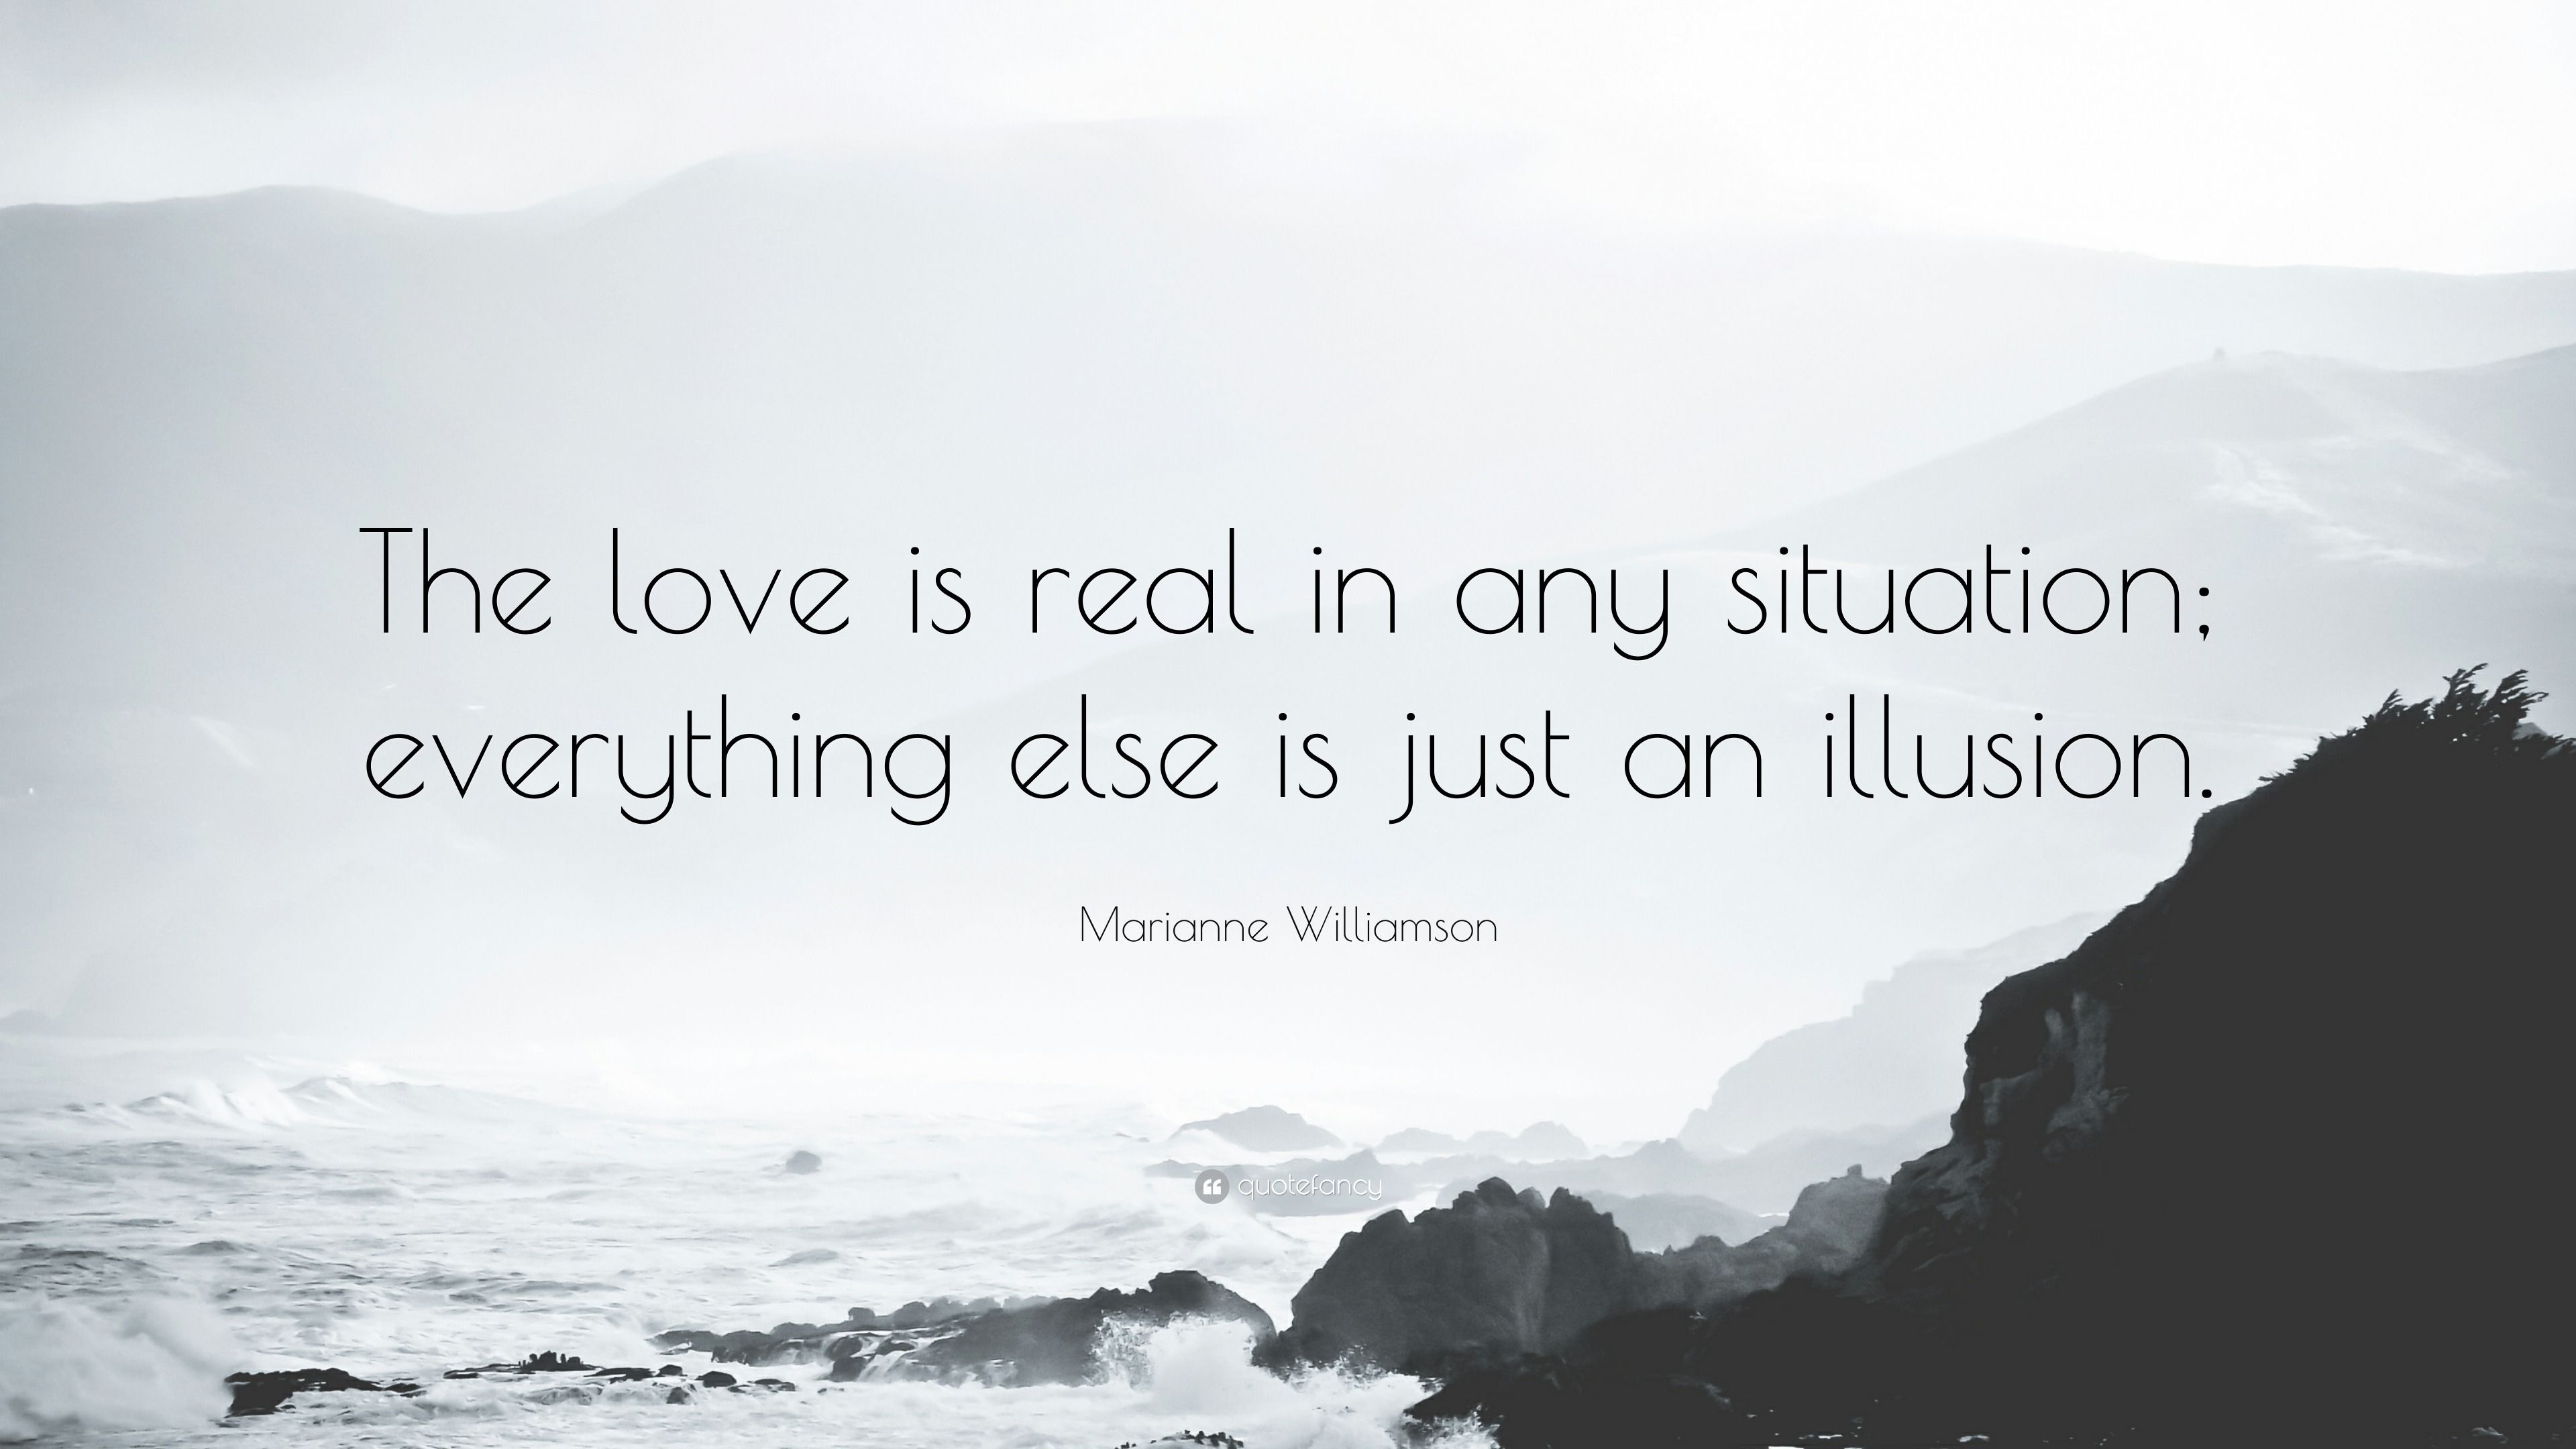 https://quotefancy.com/media/wallpaper/3840x2160/105170-Marianne-Williamson-Quote-The-love-is-real-in-any-situation.jpg